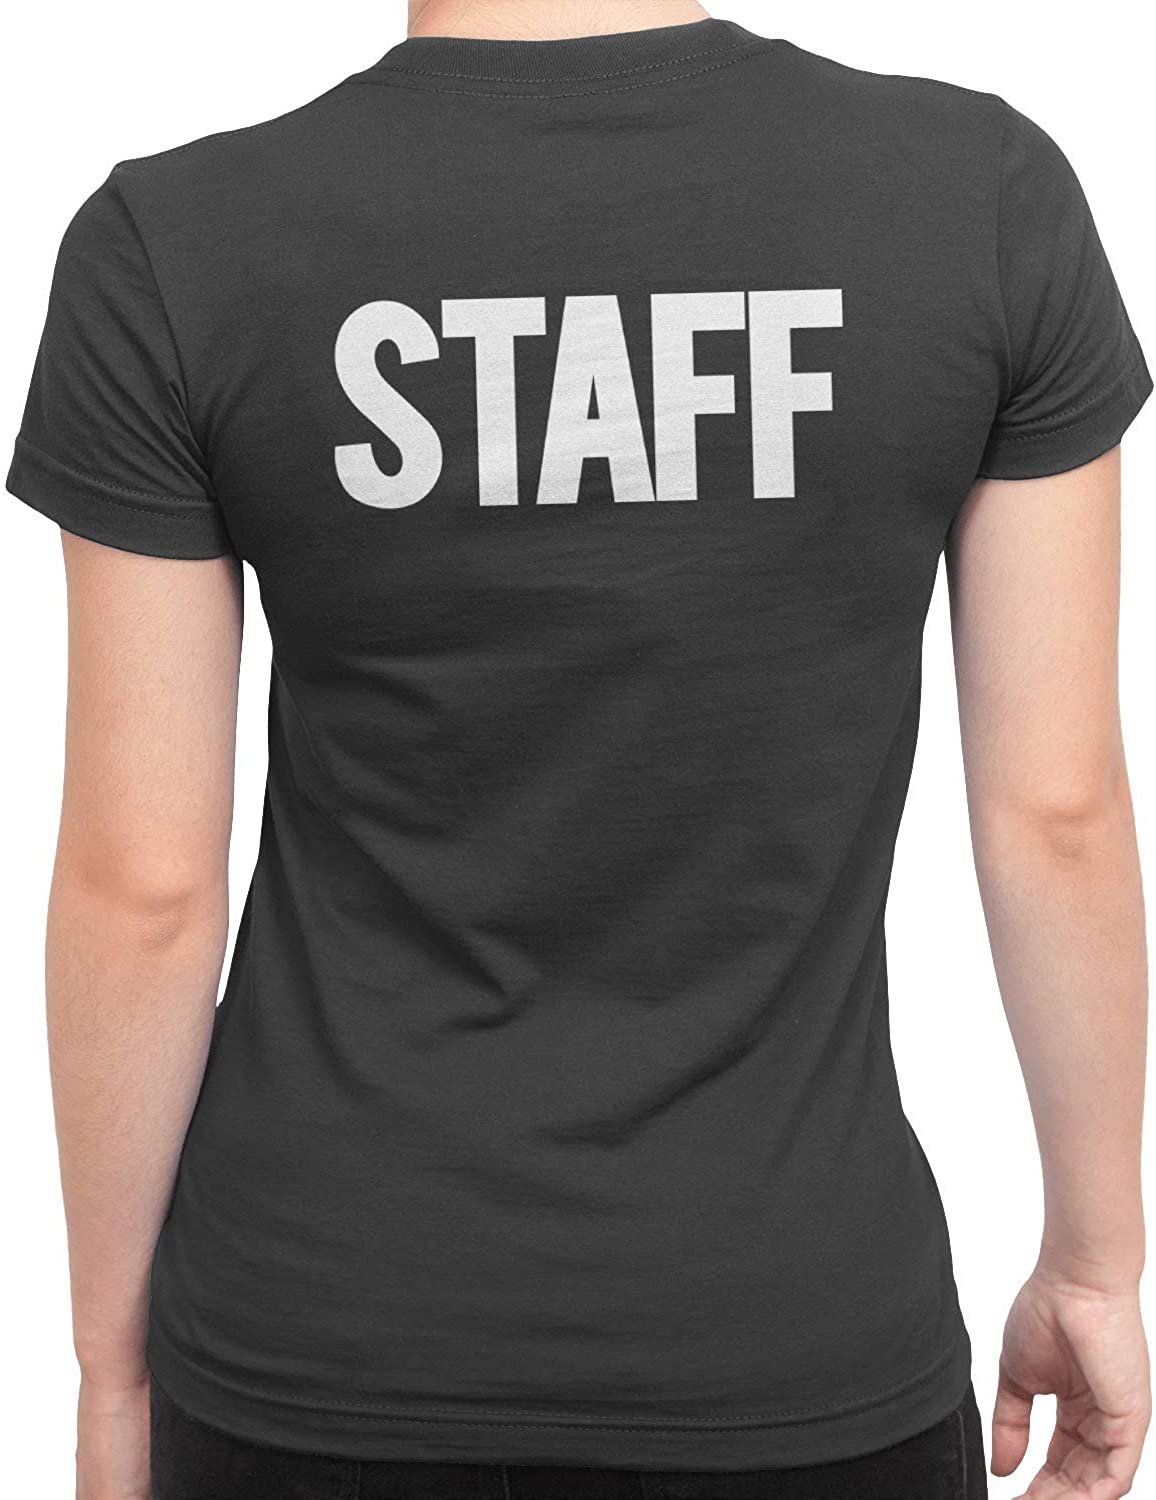 Staff Ladies Short Sleeve T-Shirt (Solid Design, Charcoal)